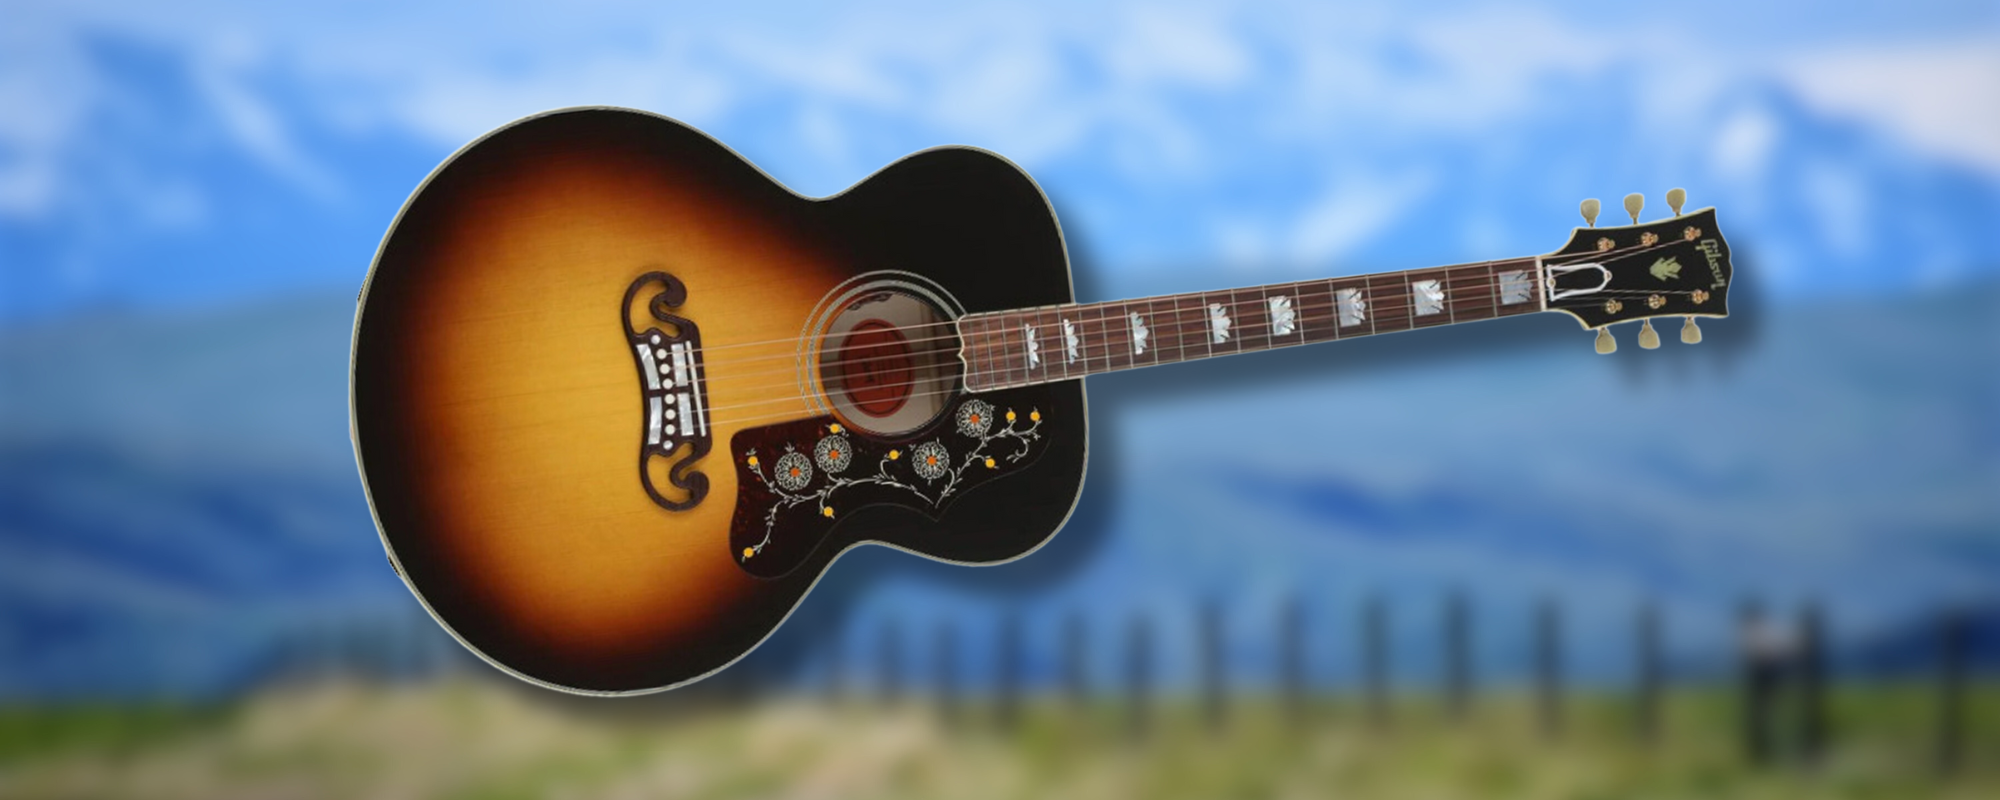 Gibson SJ-200 Review: “The King of the Flat Tops”